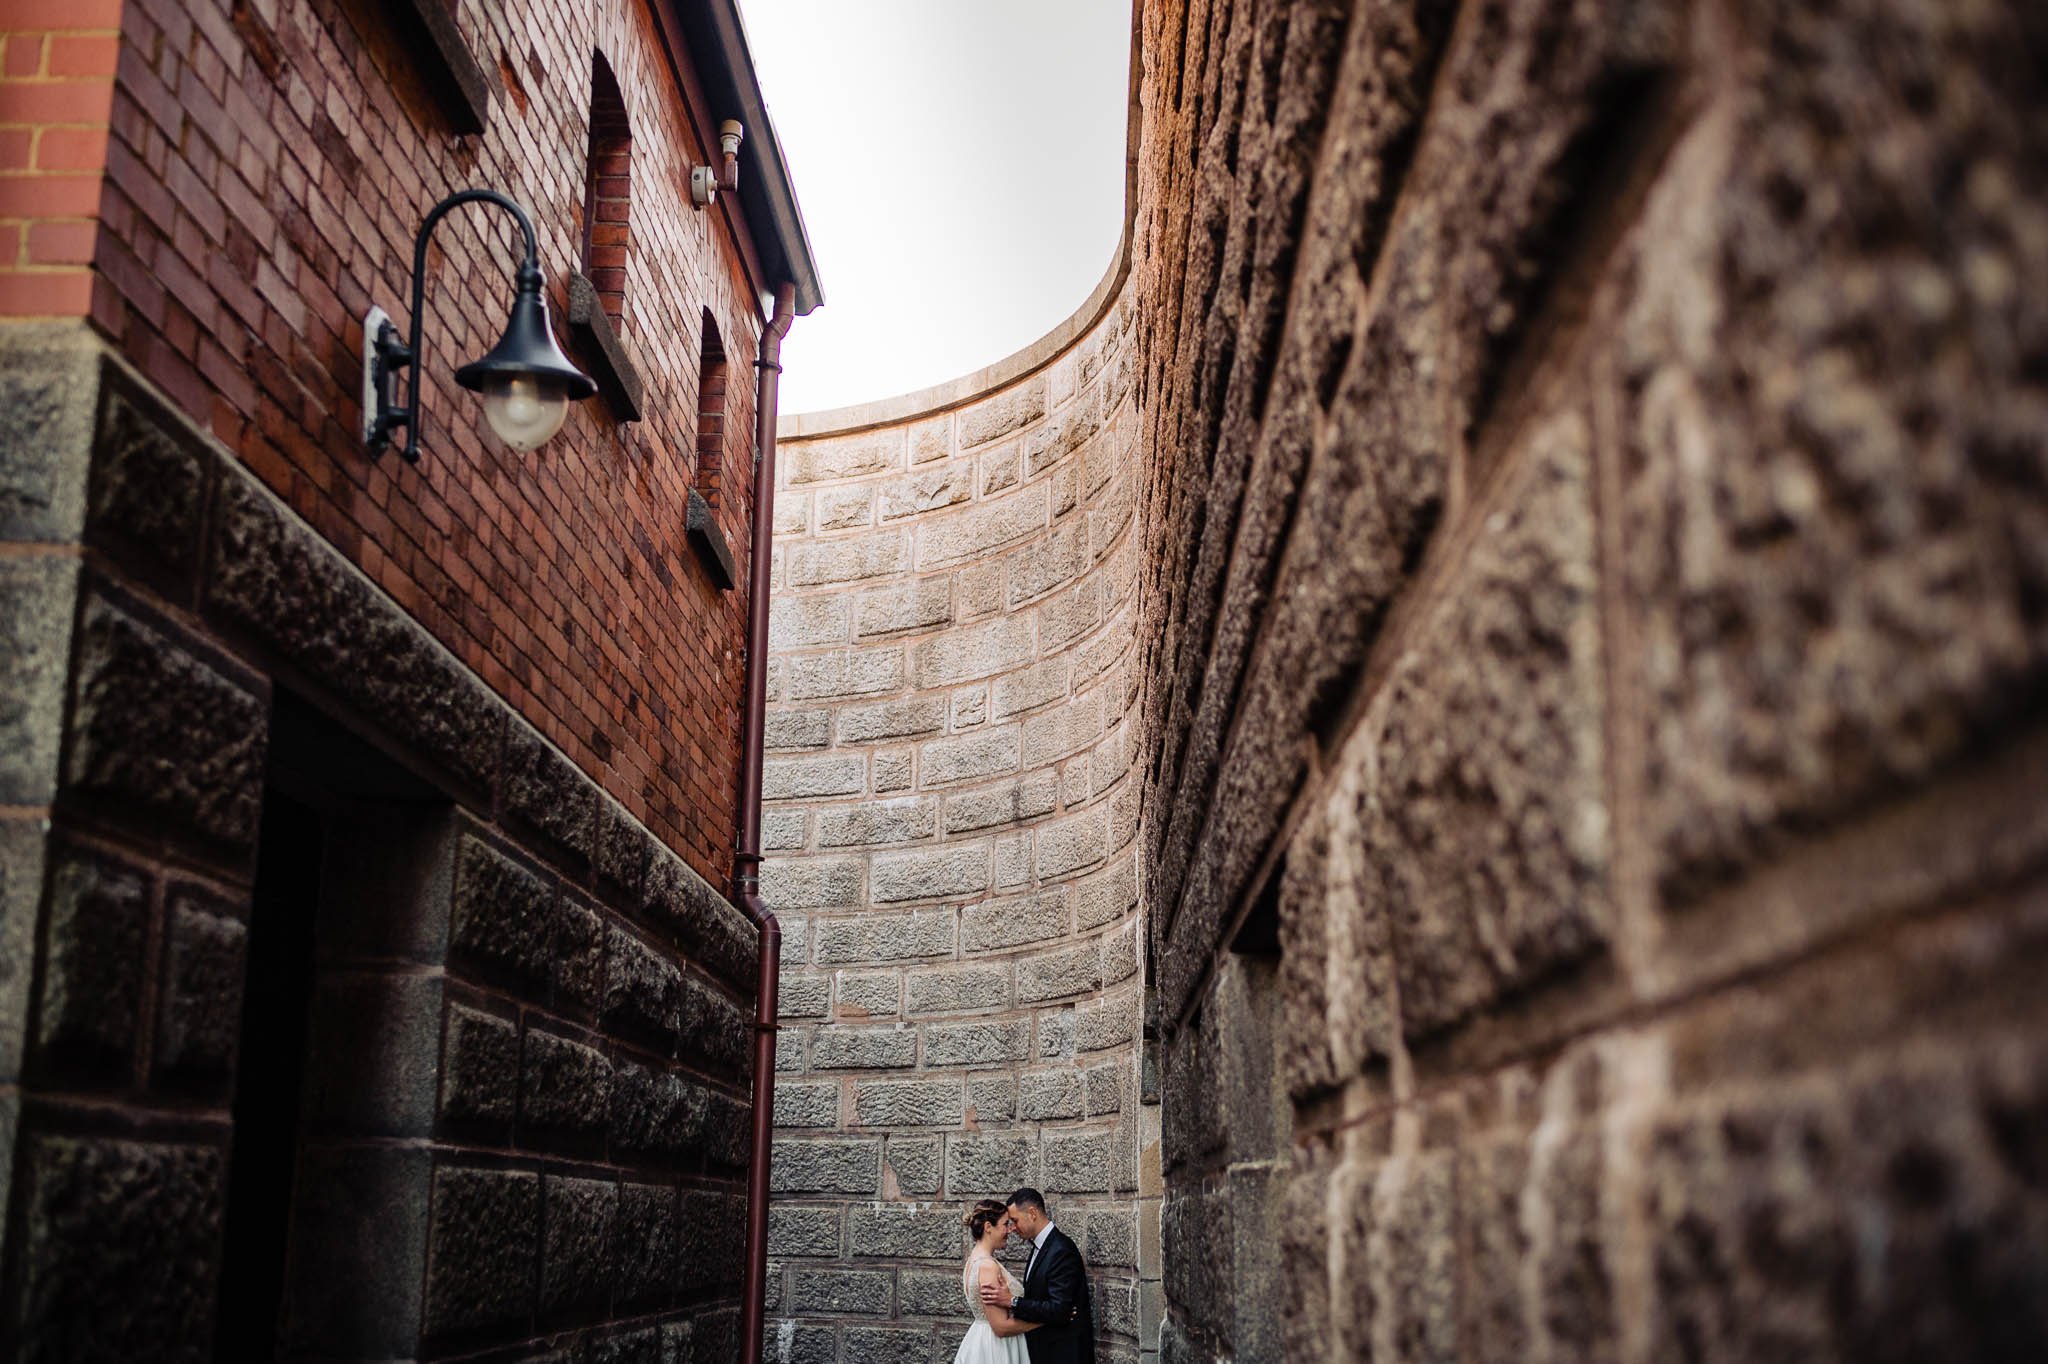 Bride and Groom holding each other in  Citadel Hill with brick walls taking up whole frame